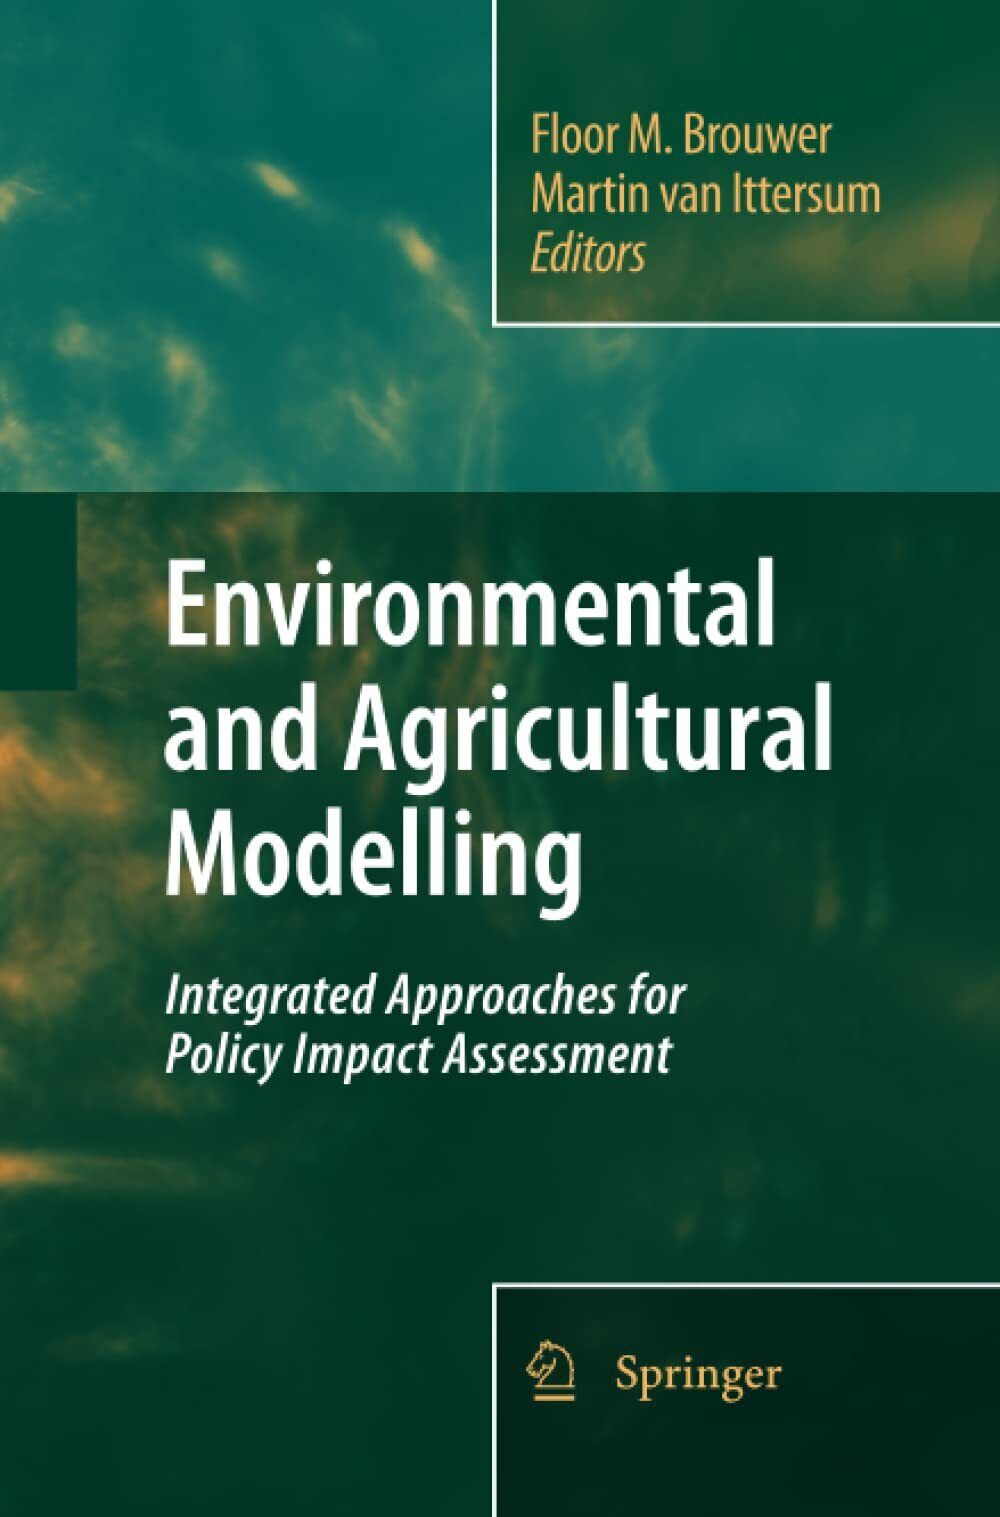 Environmental and Agricultural Modelling - Floor M. Brouwer - Springer, 2014